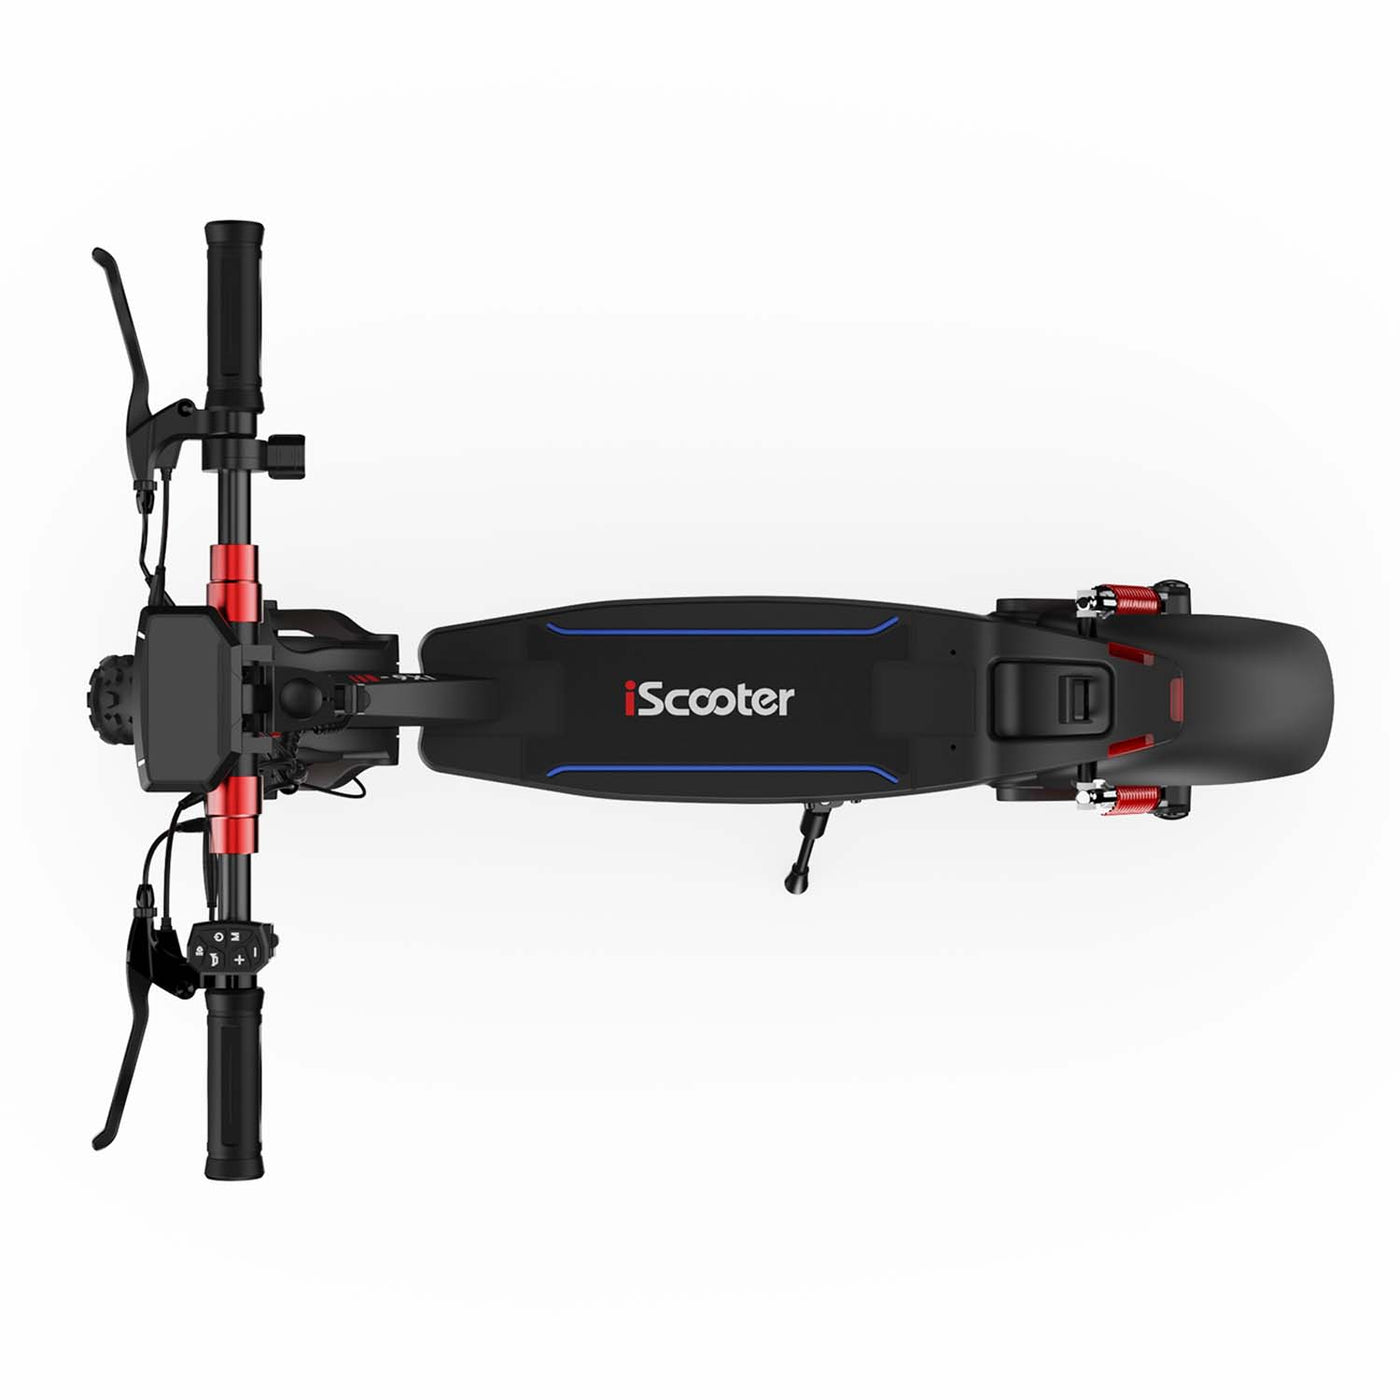 iScooter iX6 1000W Off Road Electric Scooter With NFC Key